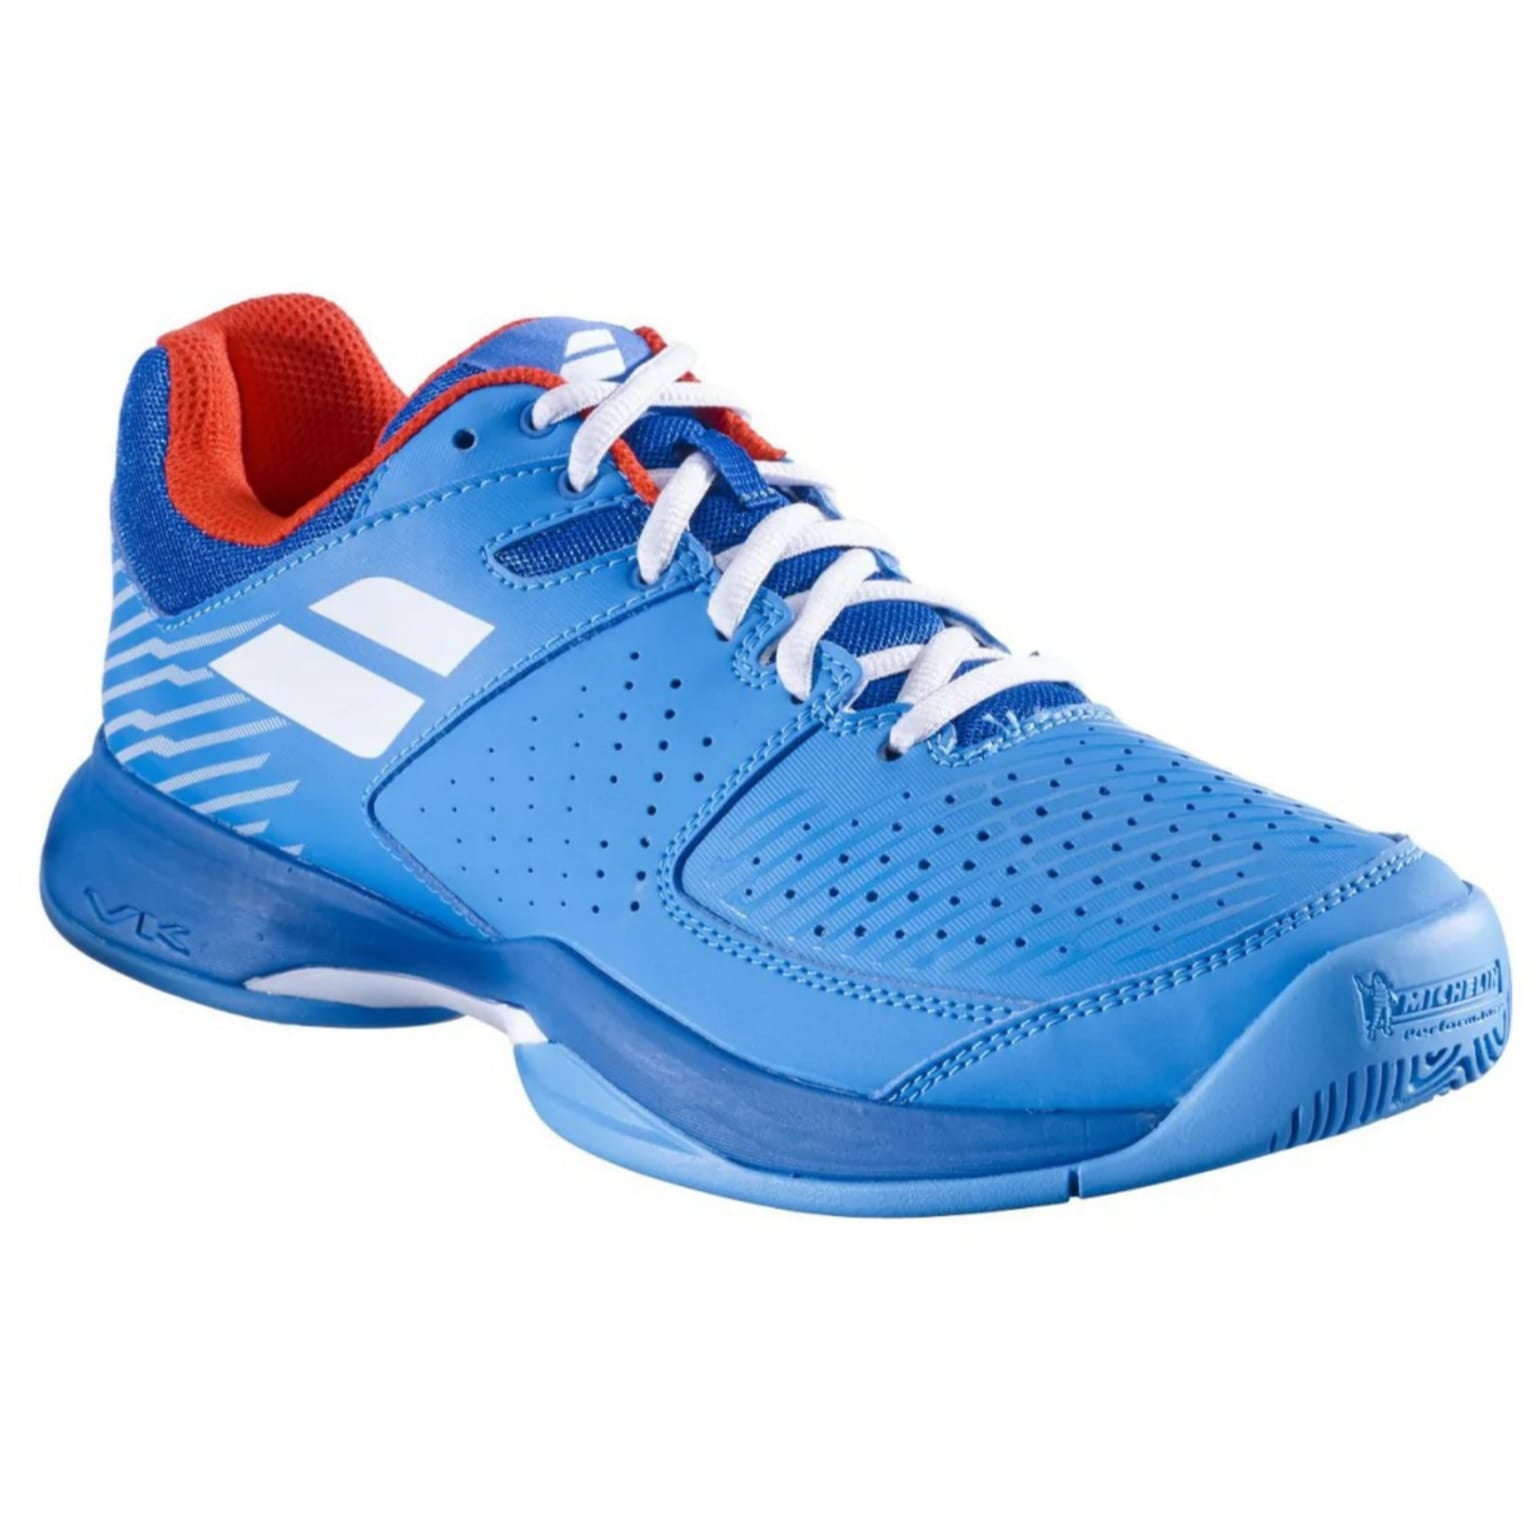 Tenis Babolat Cud Pulsion All Court (Blue/White)